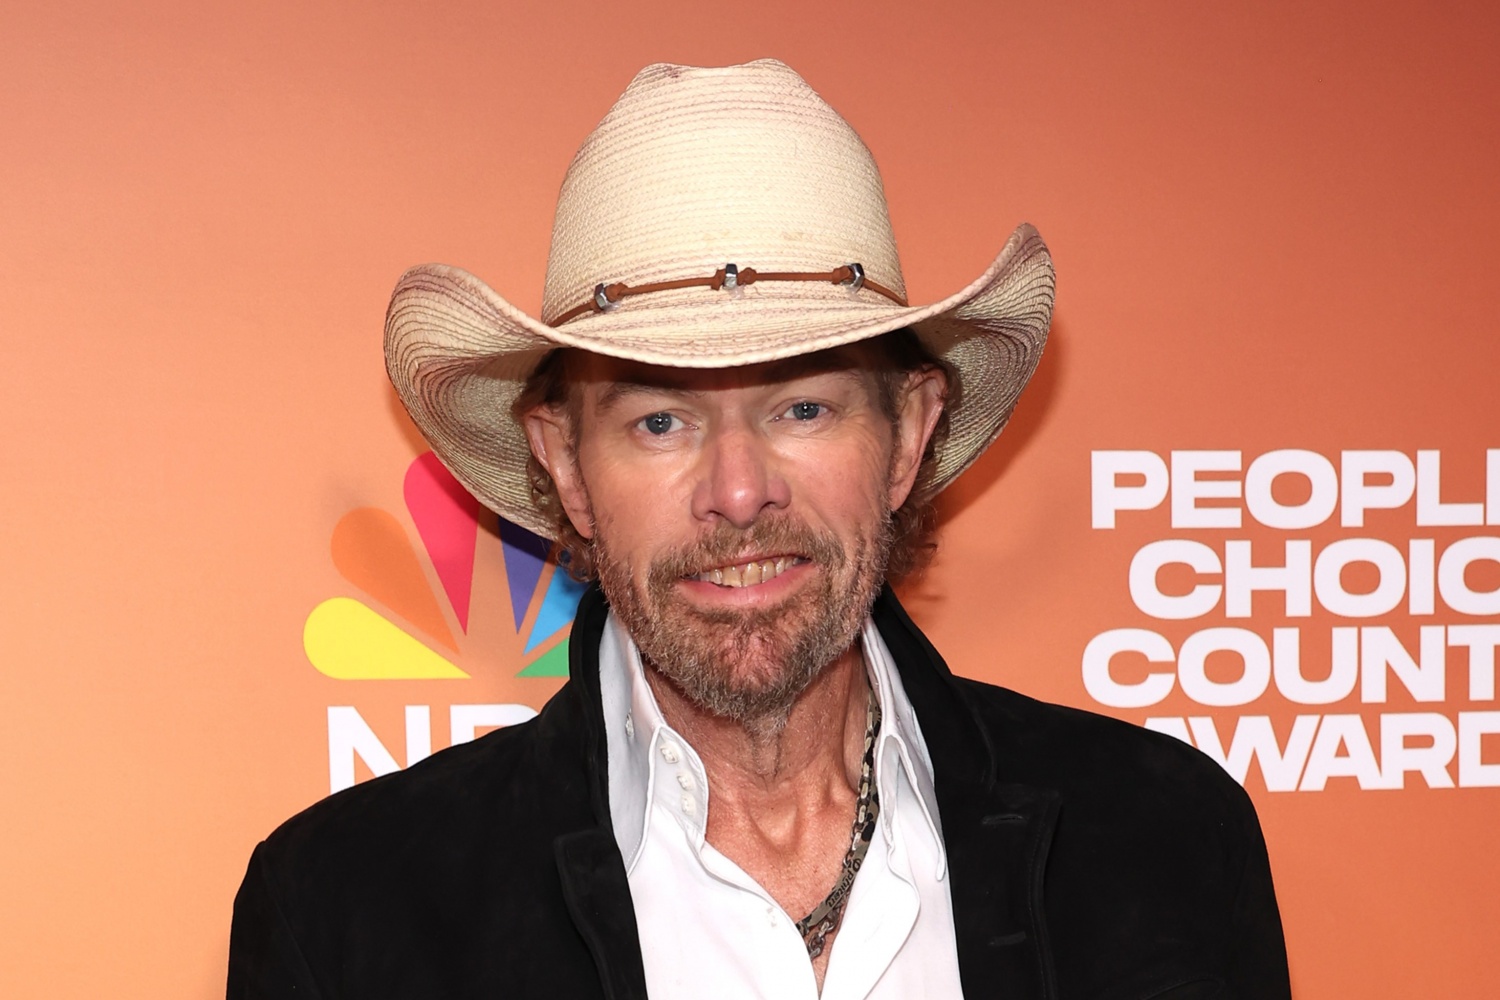 Toby Keith's Cause of Death: What To Know About the Cancer That Killed Country Star